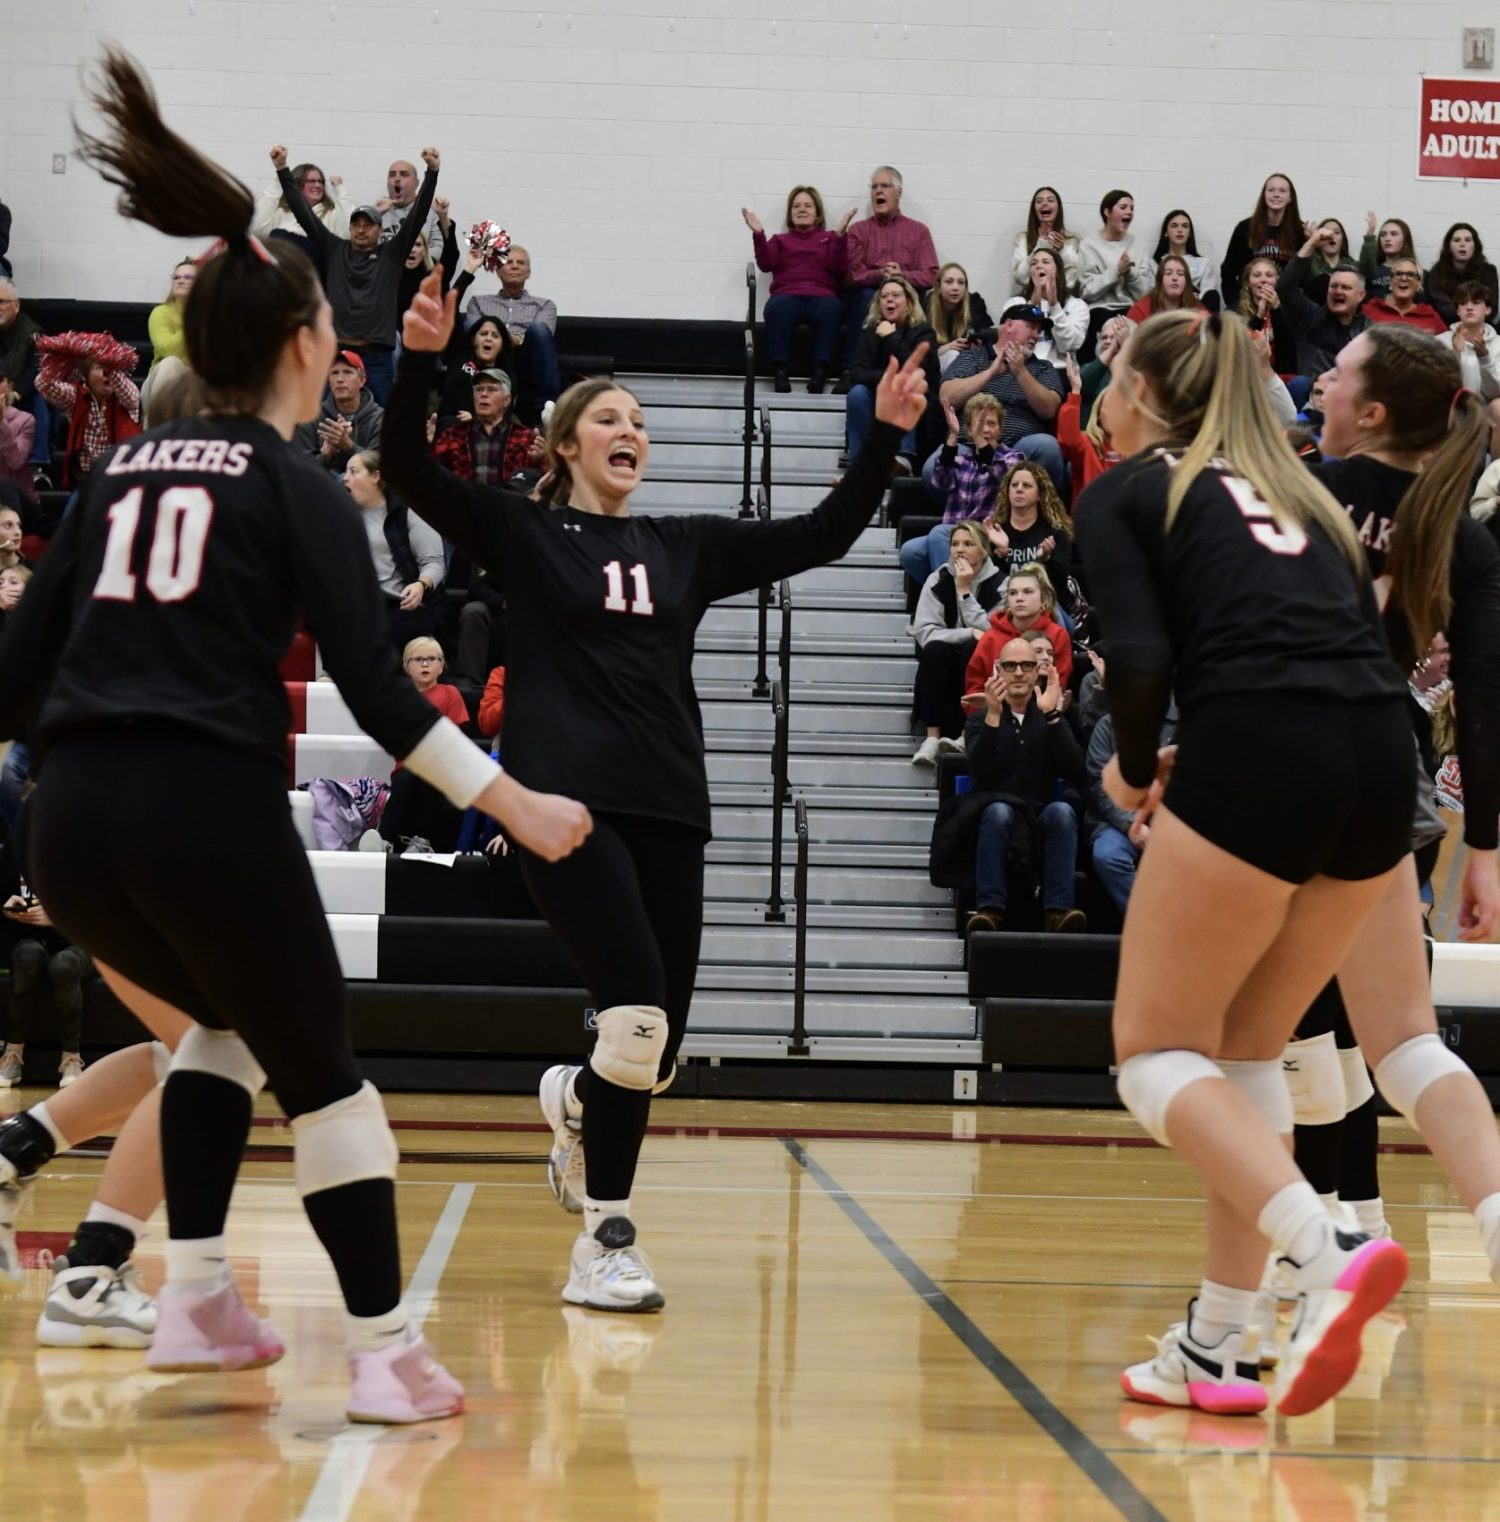 Spring Lake is heading to the volleyball district finals after taking down Fruitport